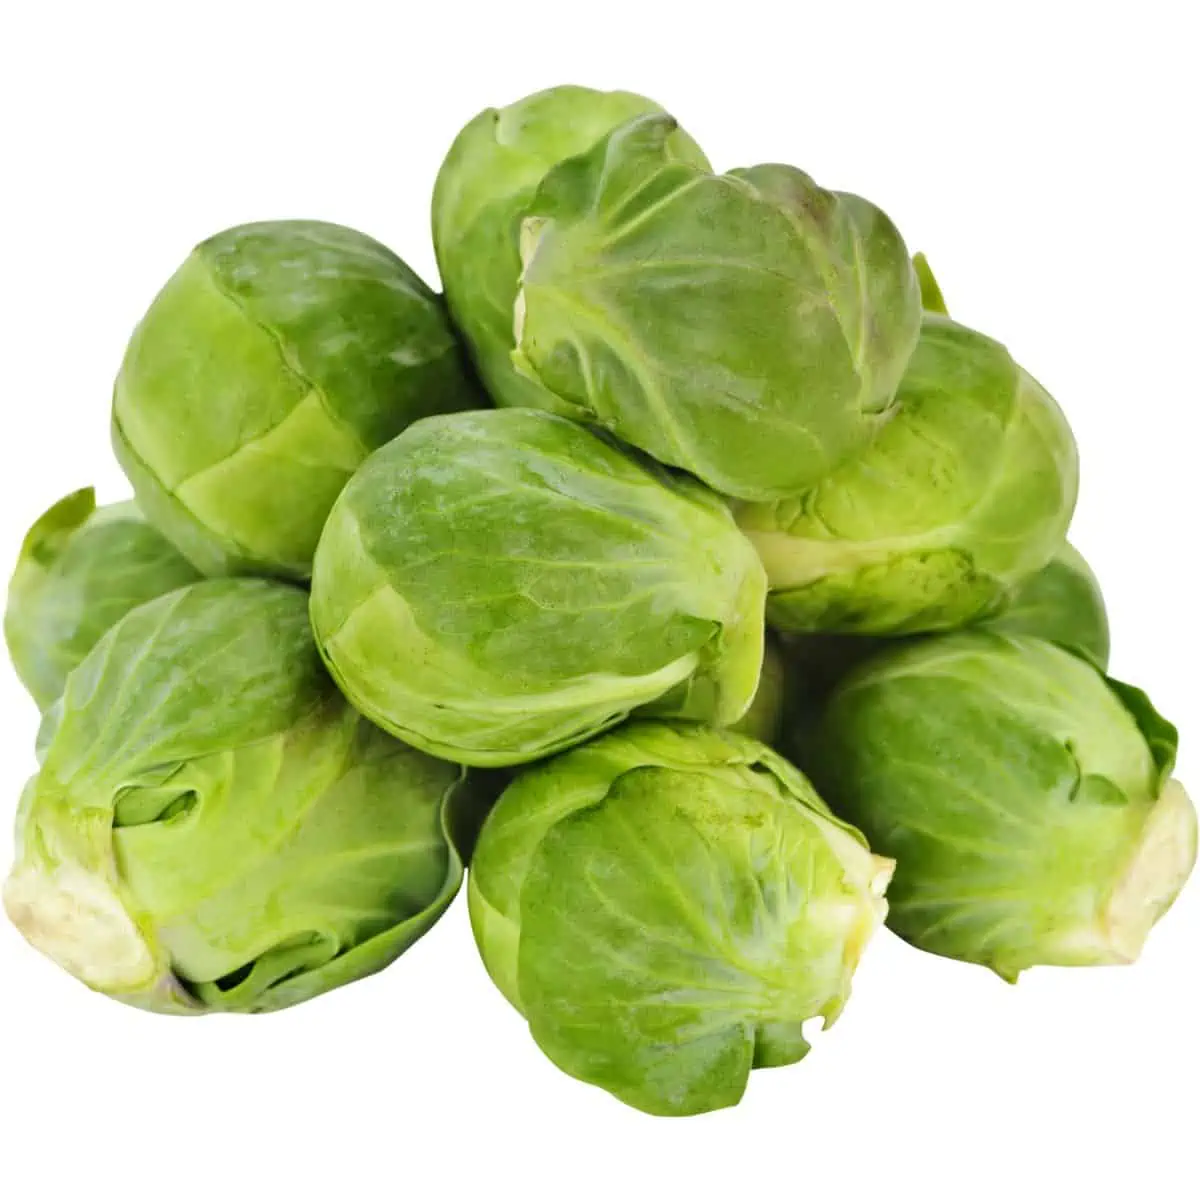 A pile of Brussels sprouts.